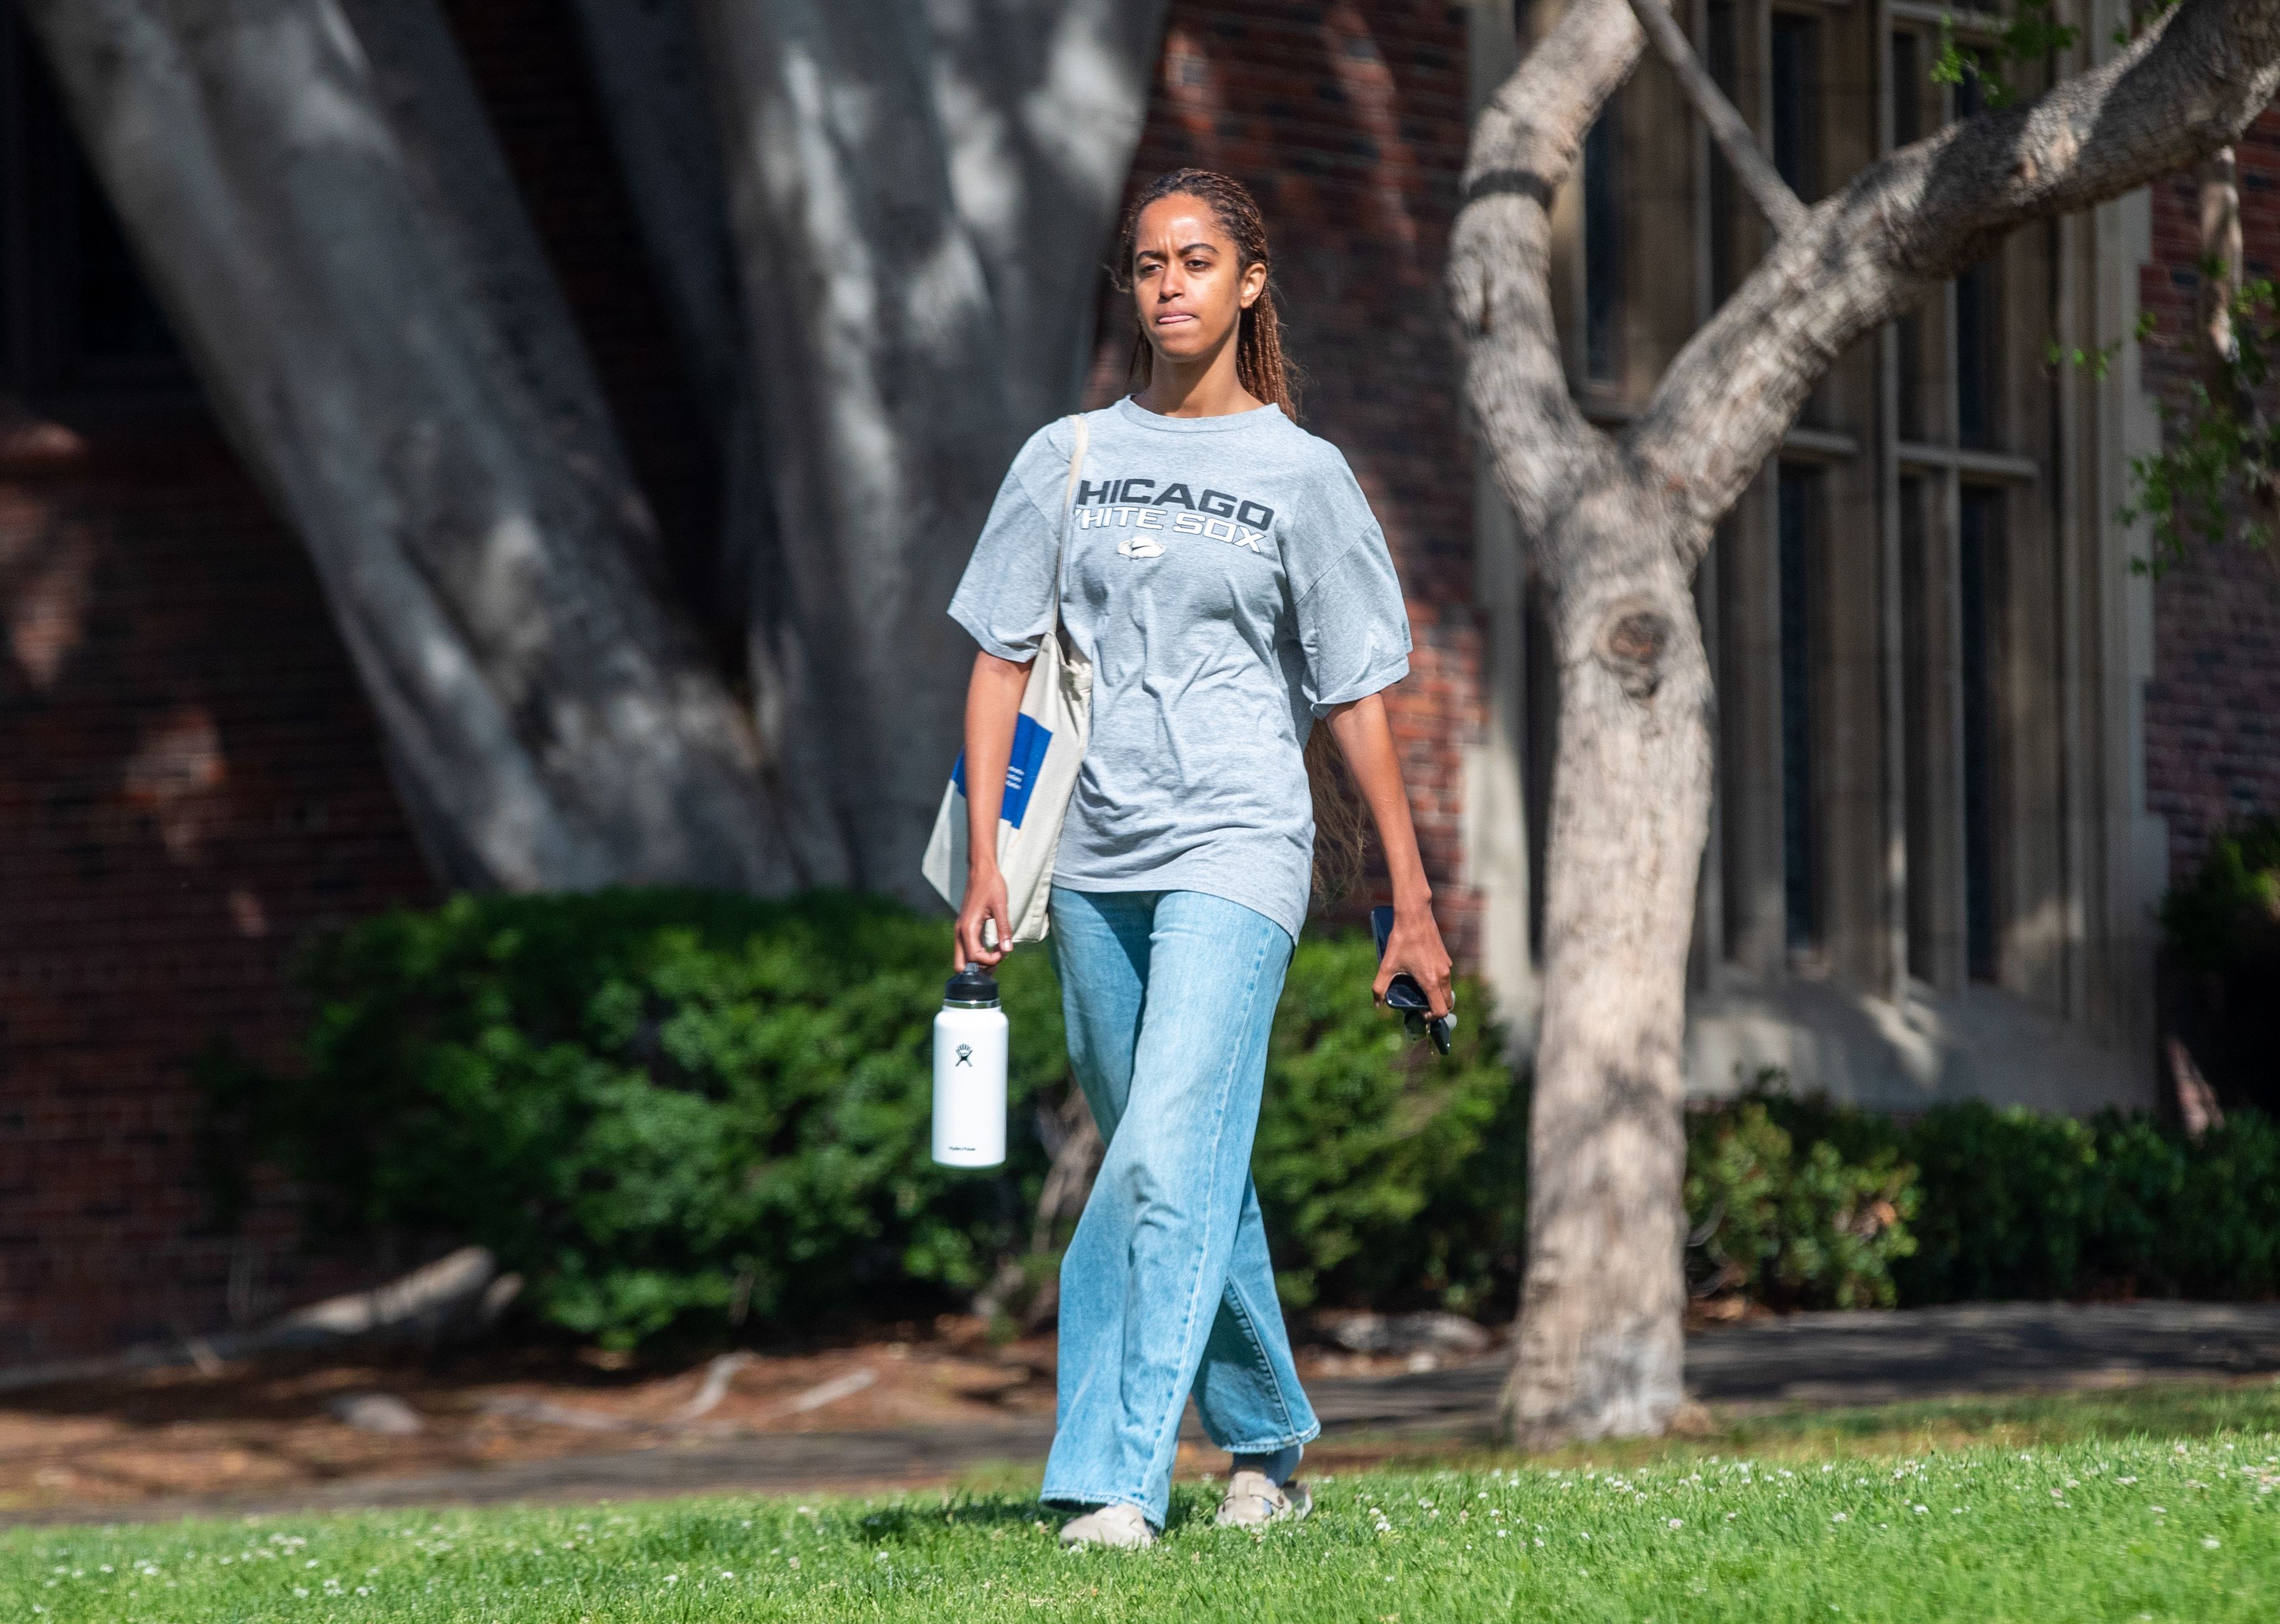 Malia Obama Pussy - Malia Obama Now: Photos of Her Today and Over the Years